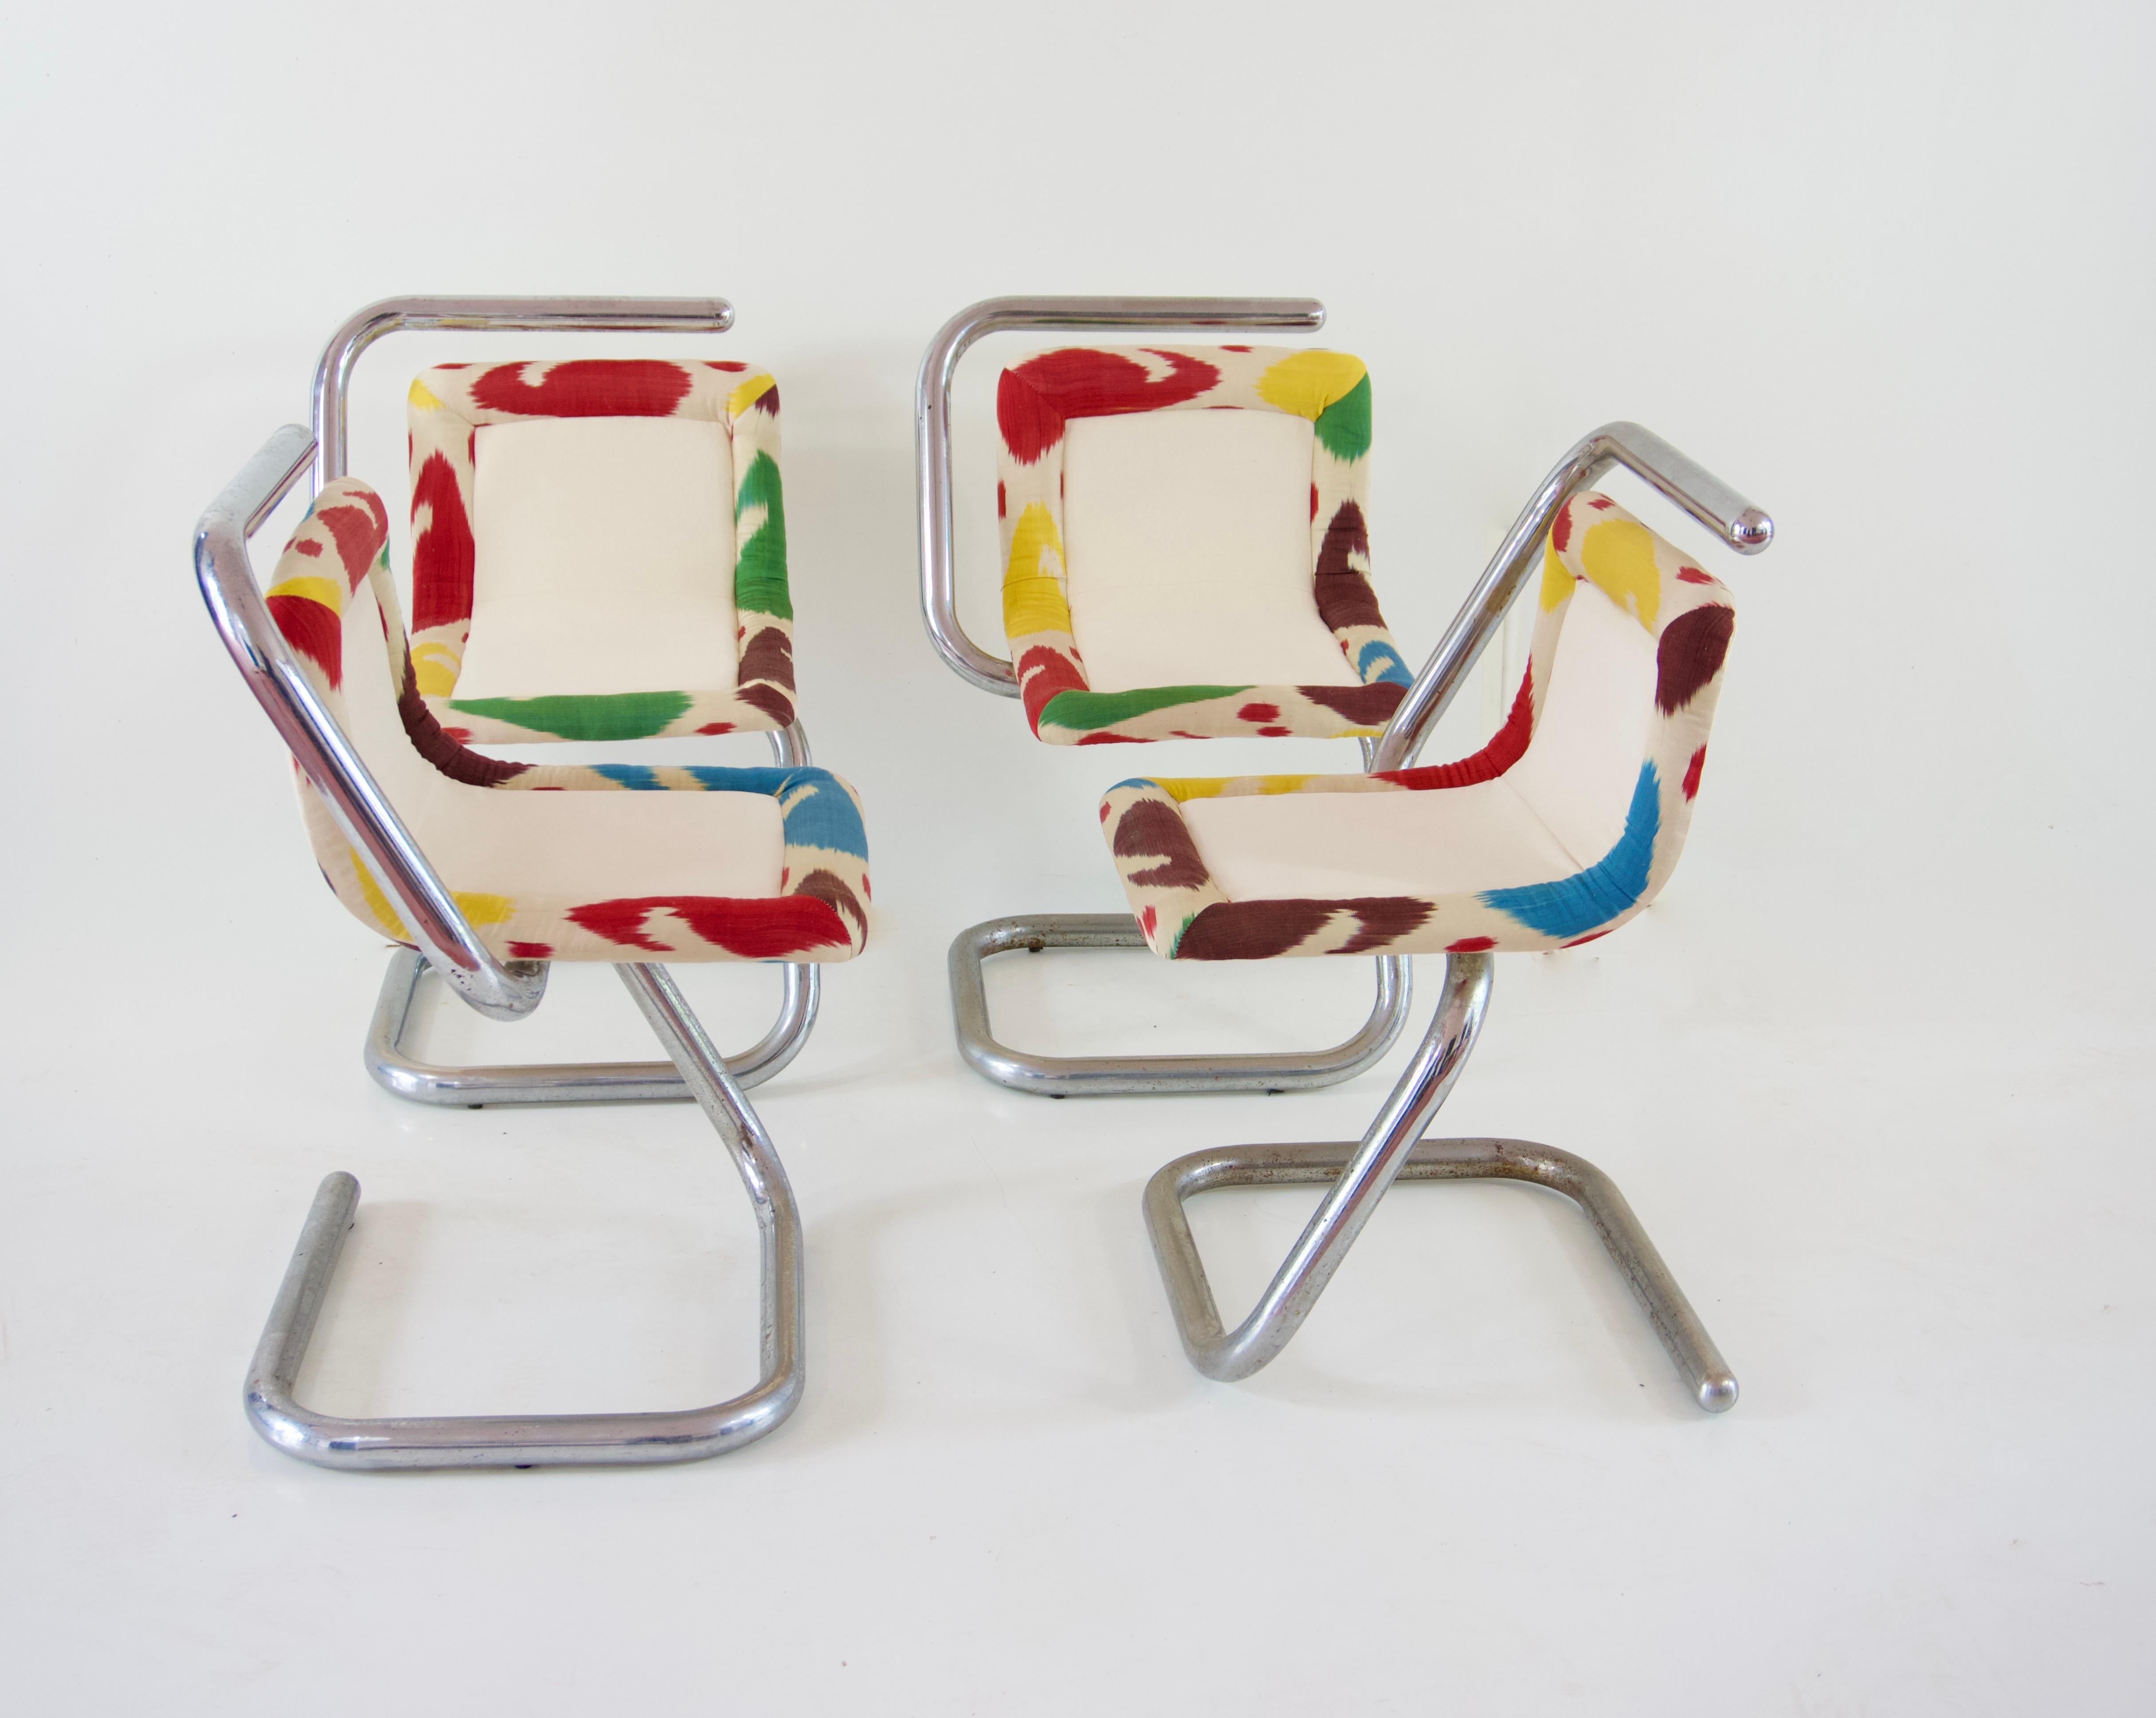 Set of Four Tubular Chrome Chairs, Velvet and Ikat, 1970 by Giotto Stoppino In Good Condition For Sale In Rome, IT